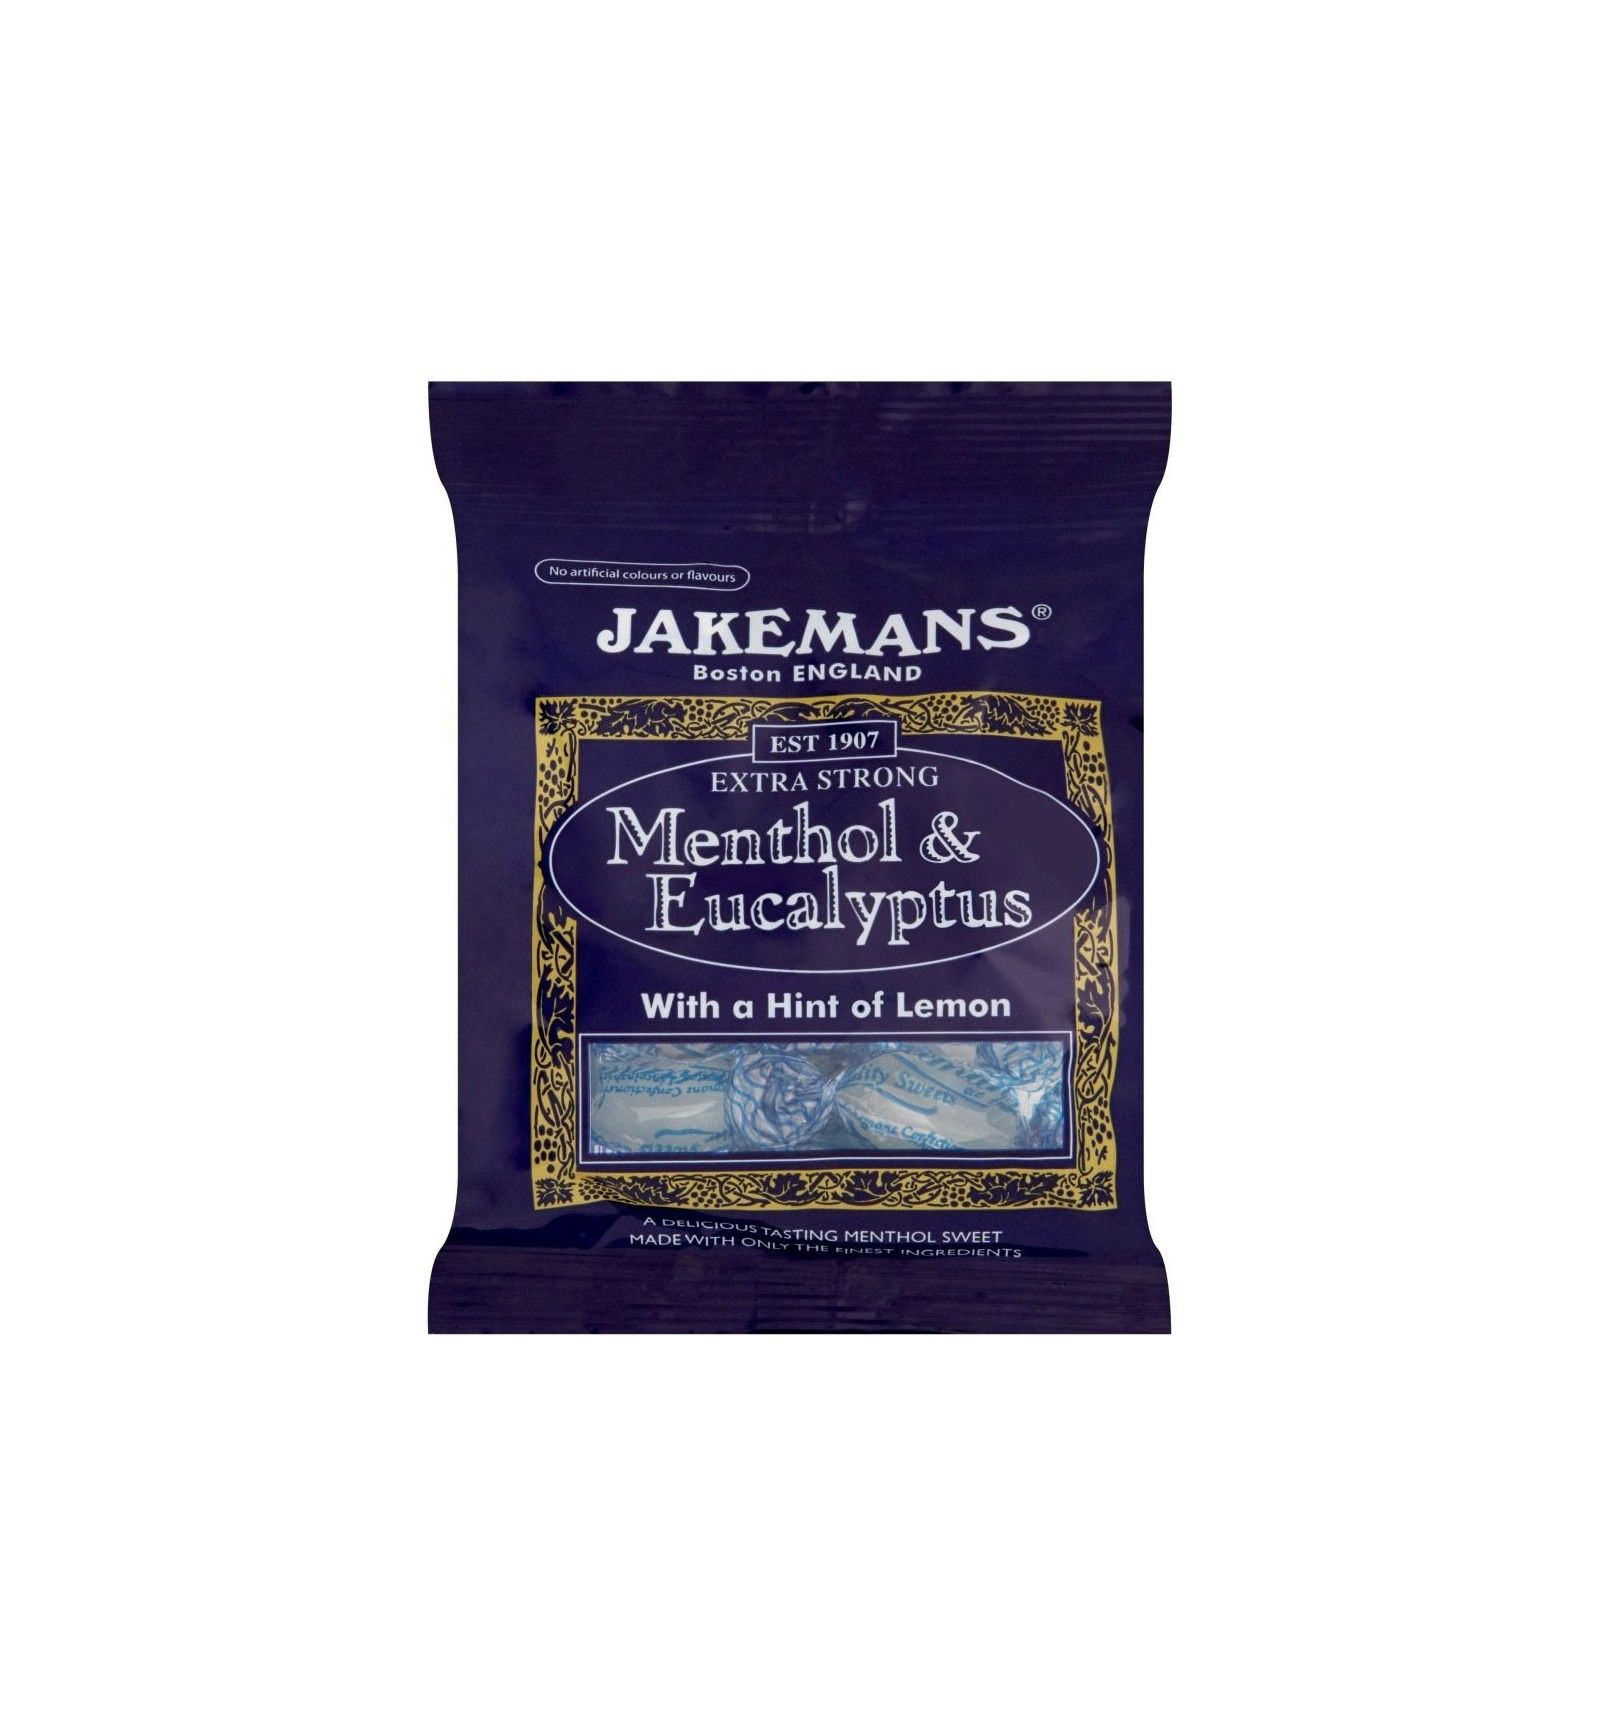 Jakemans Soothing Menthol Sweets Menthol & Eucalyptus - Pack of 3